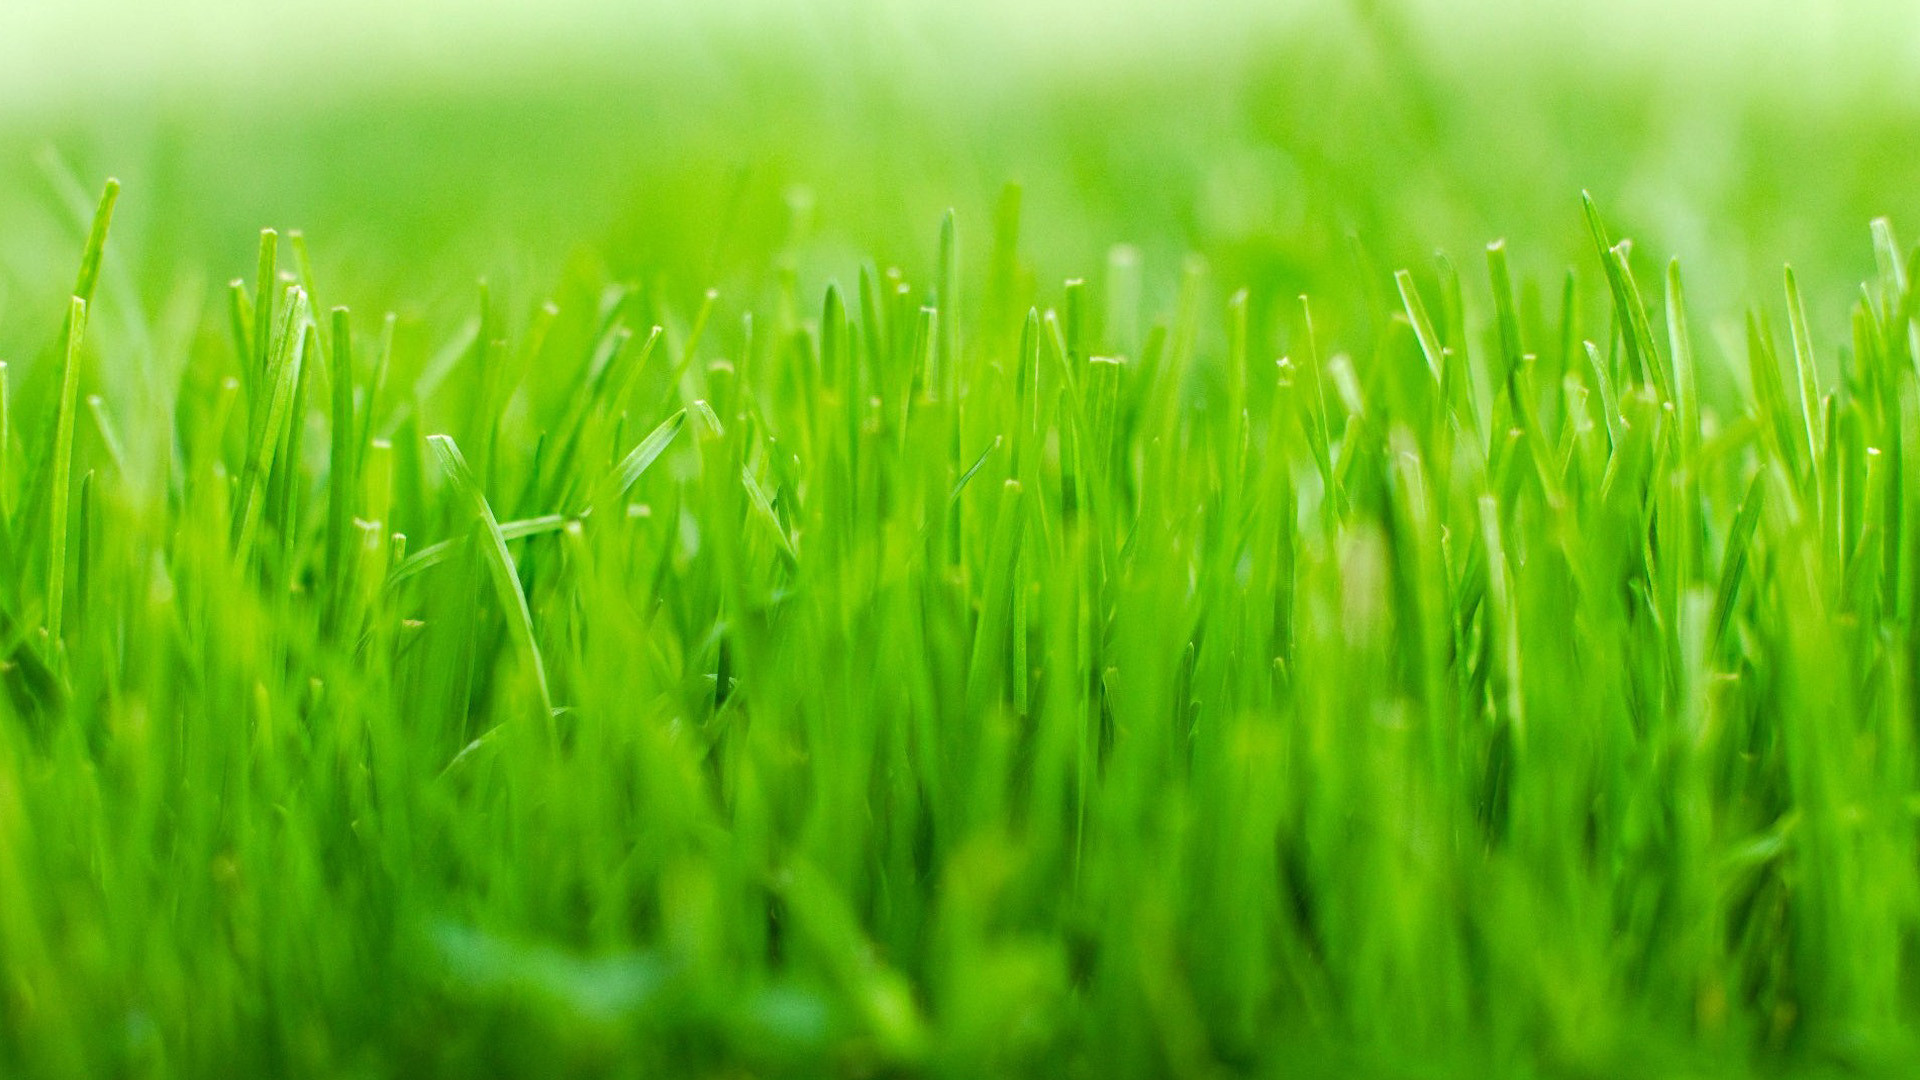 50 4K Grass Wallpapers  Background Images